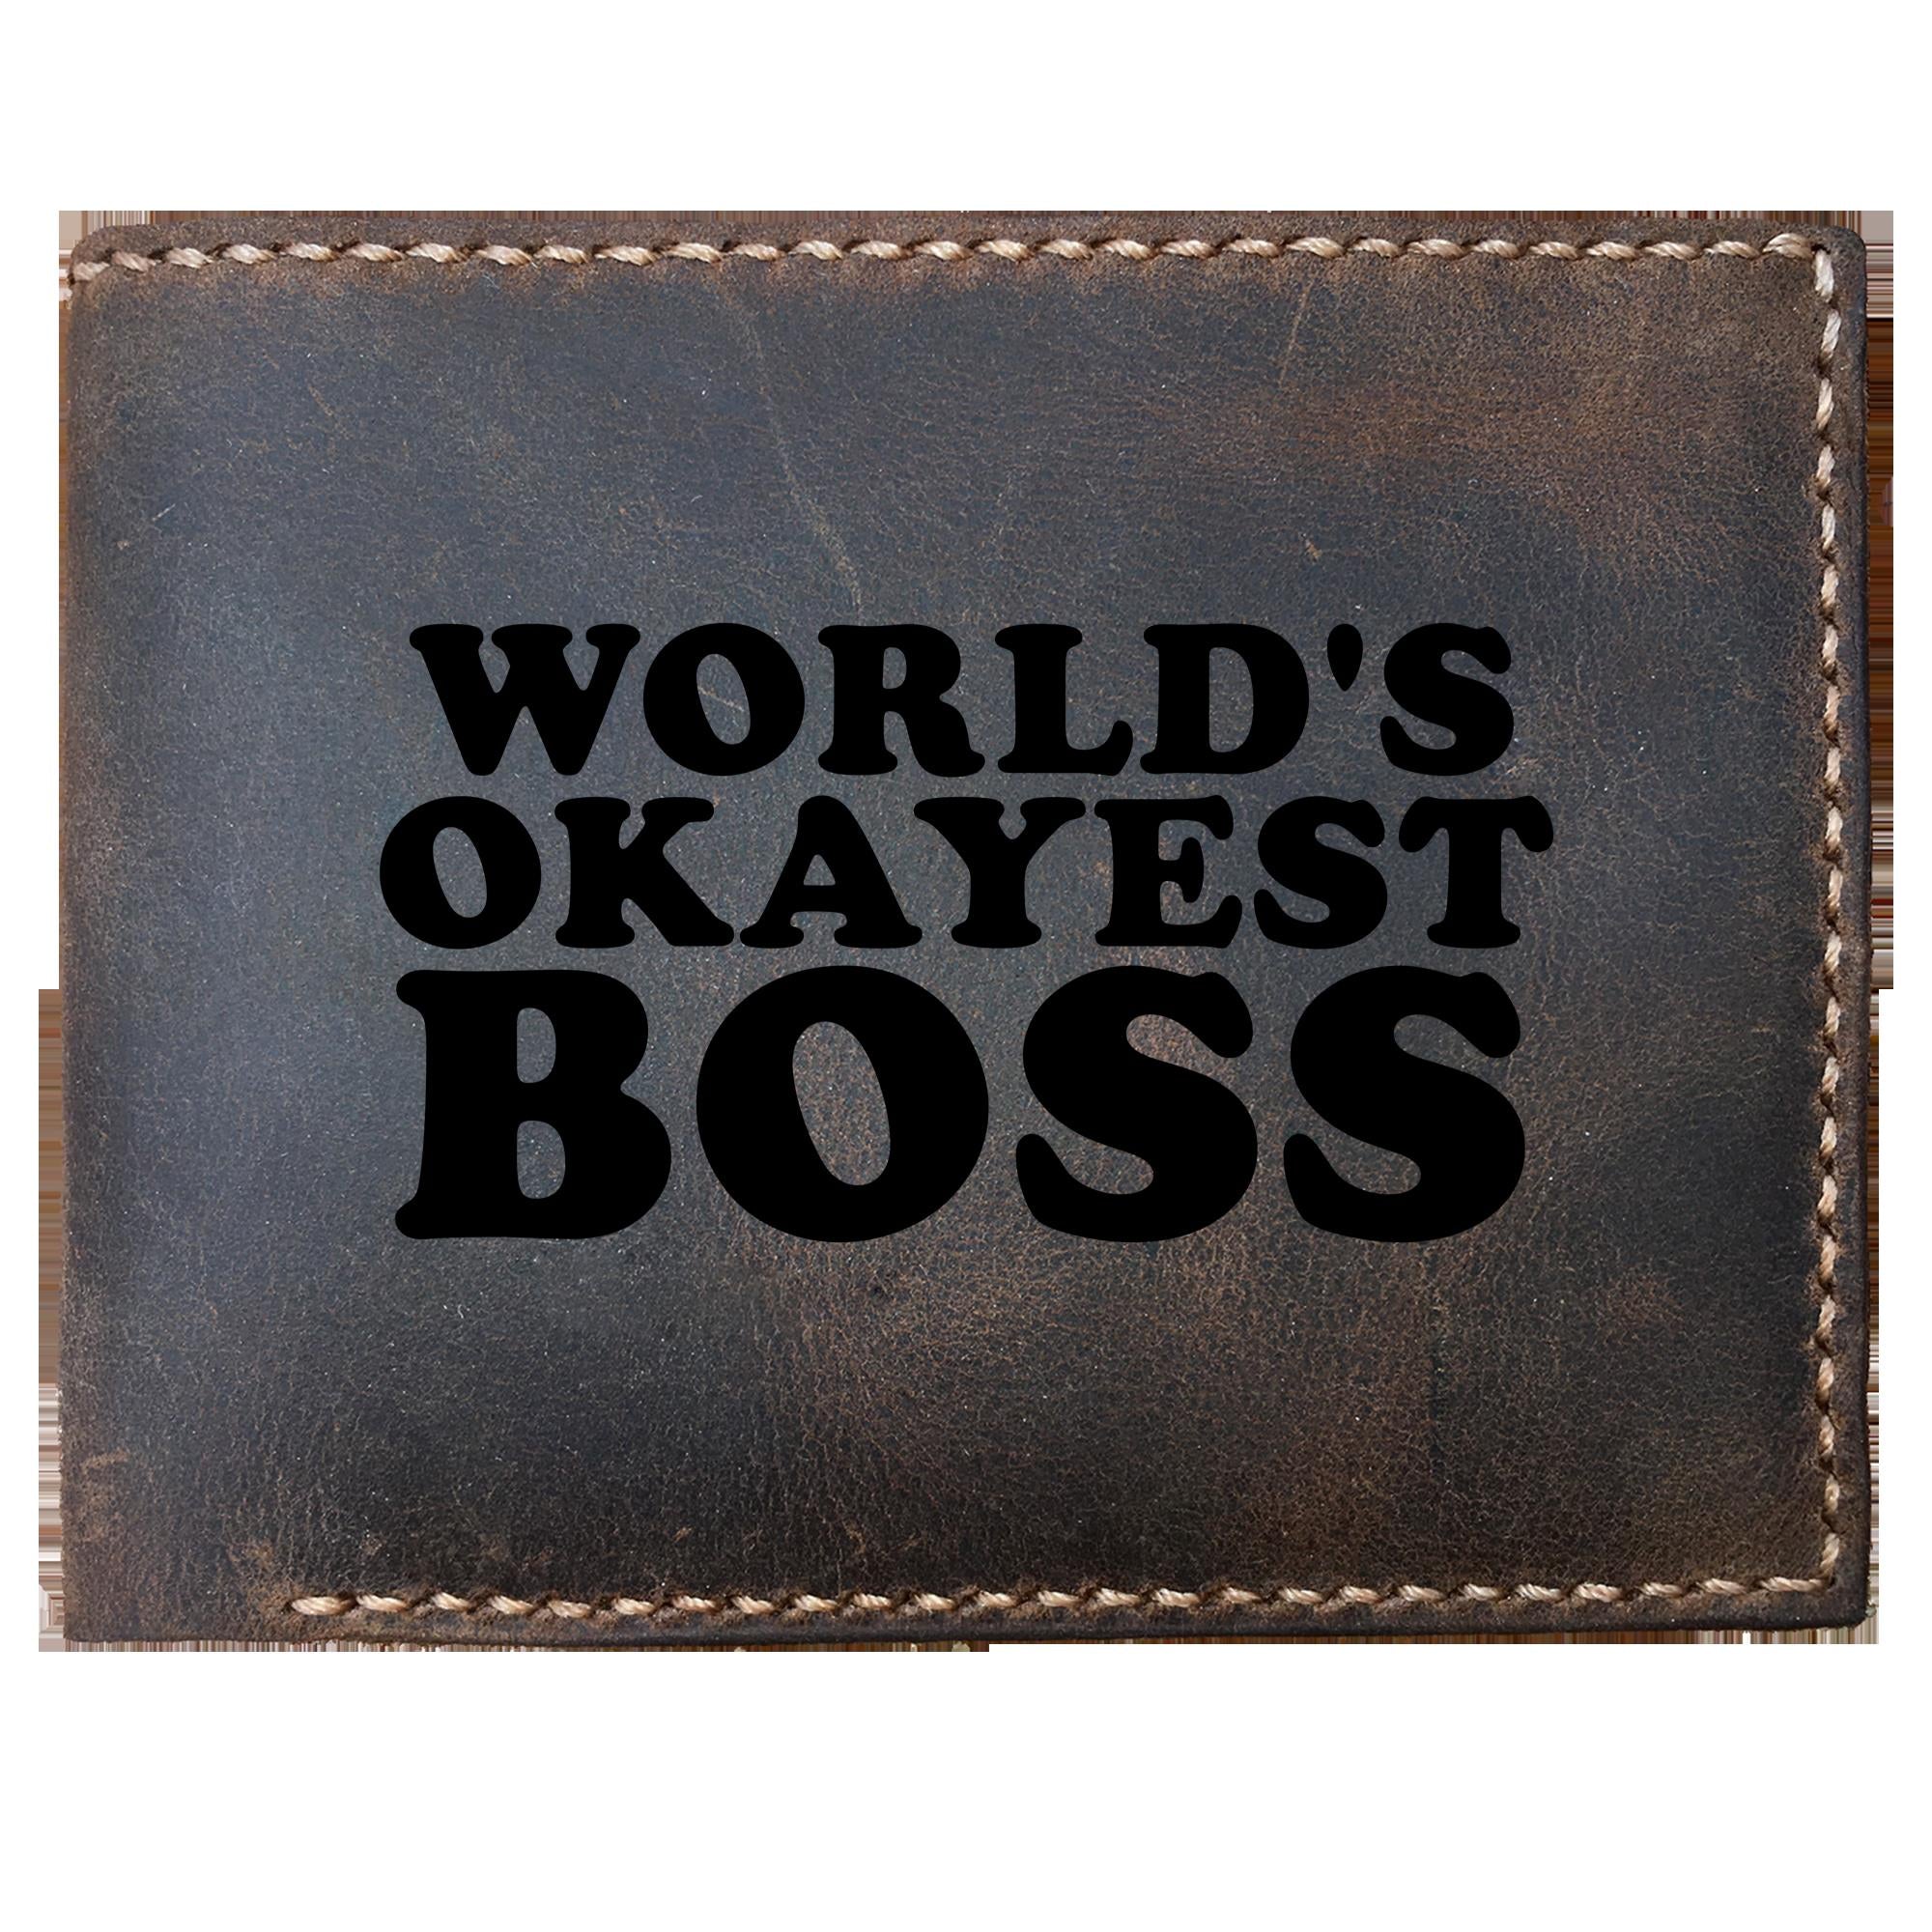 Skitongifts Funny Custom Laser Engraved Bifold Leather Wallet For Men, World's Okayest Boss. Nice Motivational And Inspirational Office Gift